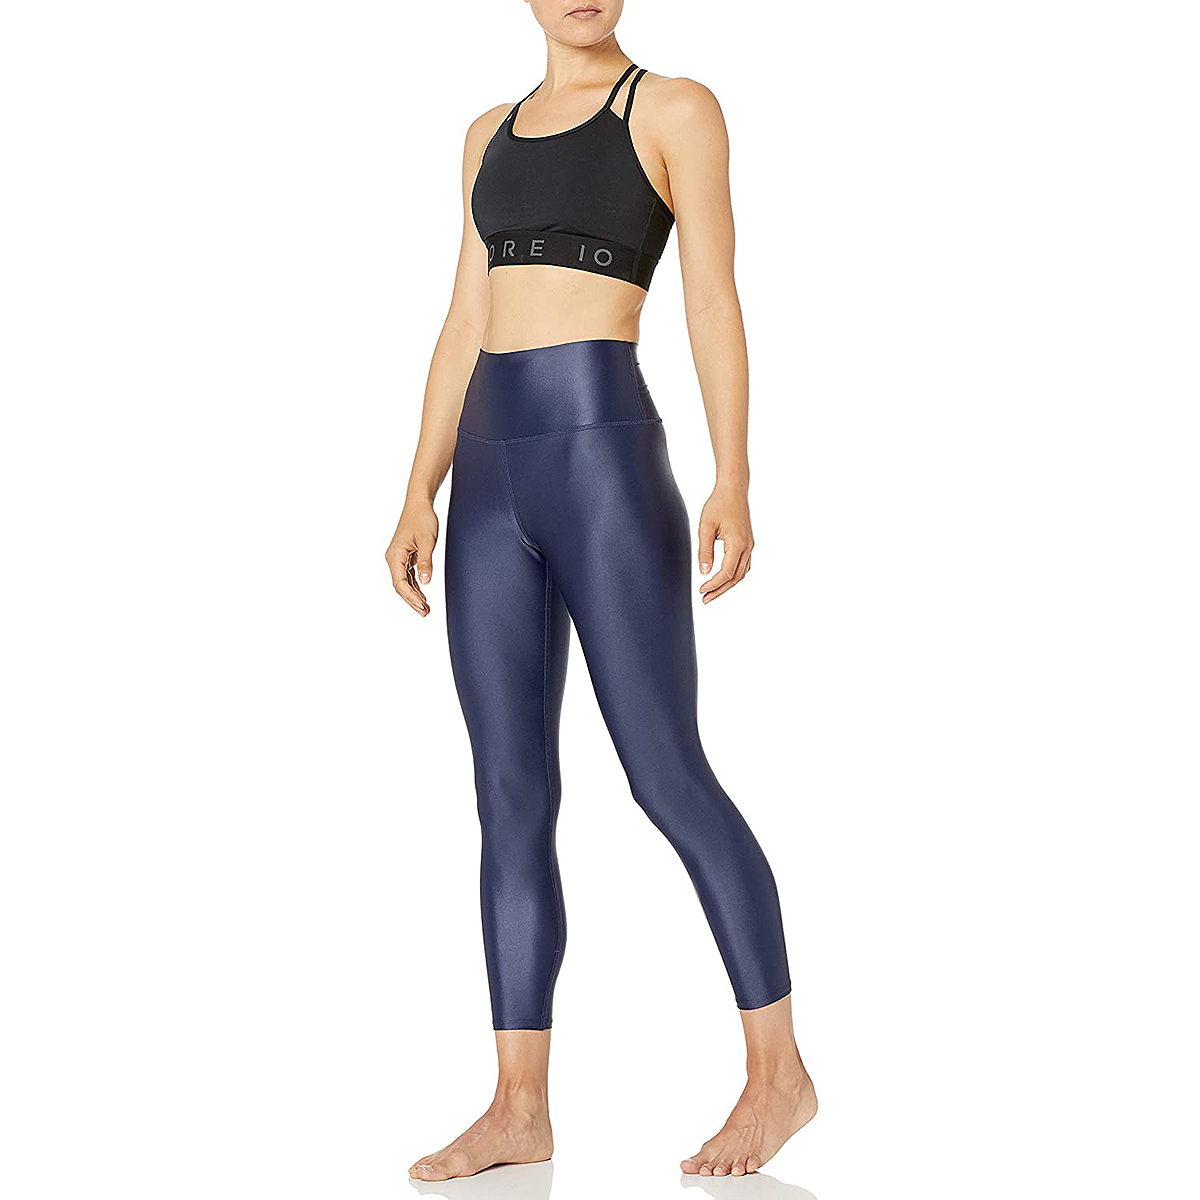 Thick High Waist Yoga Pants for Women, Tummy Control Workout